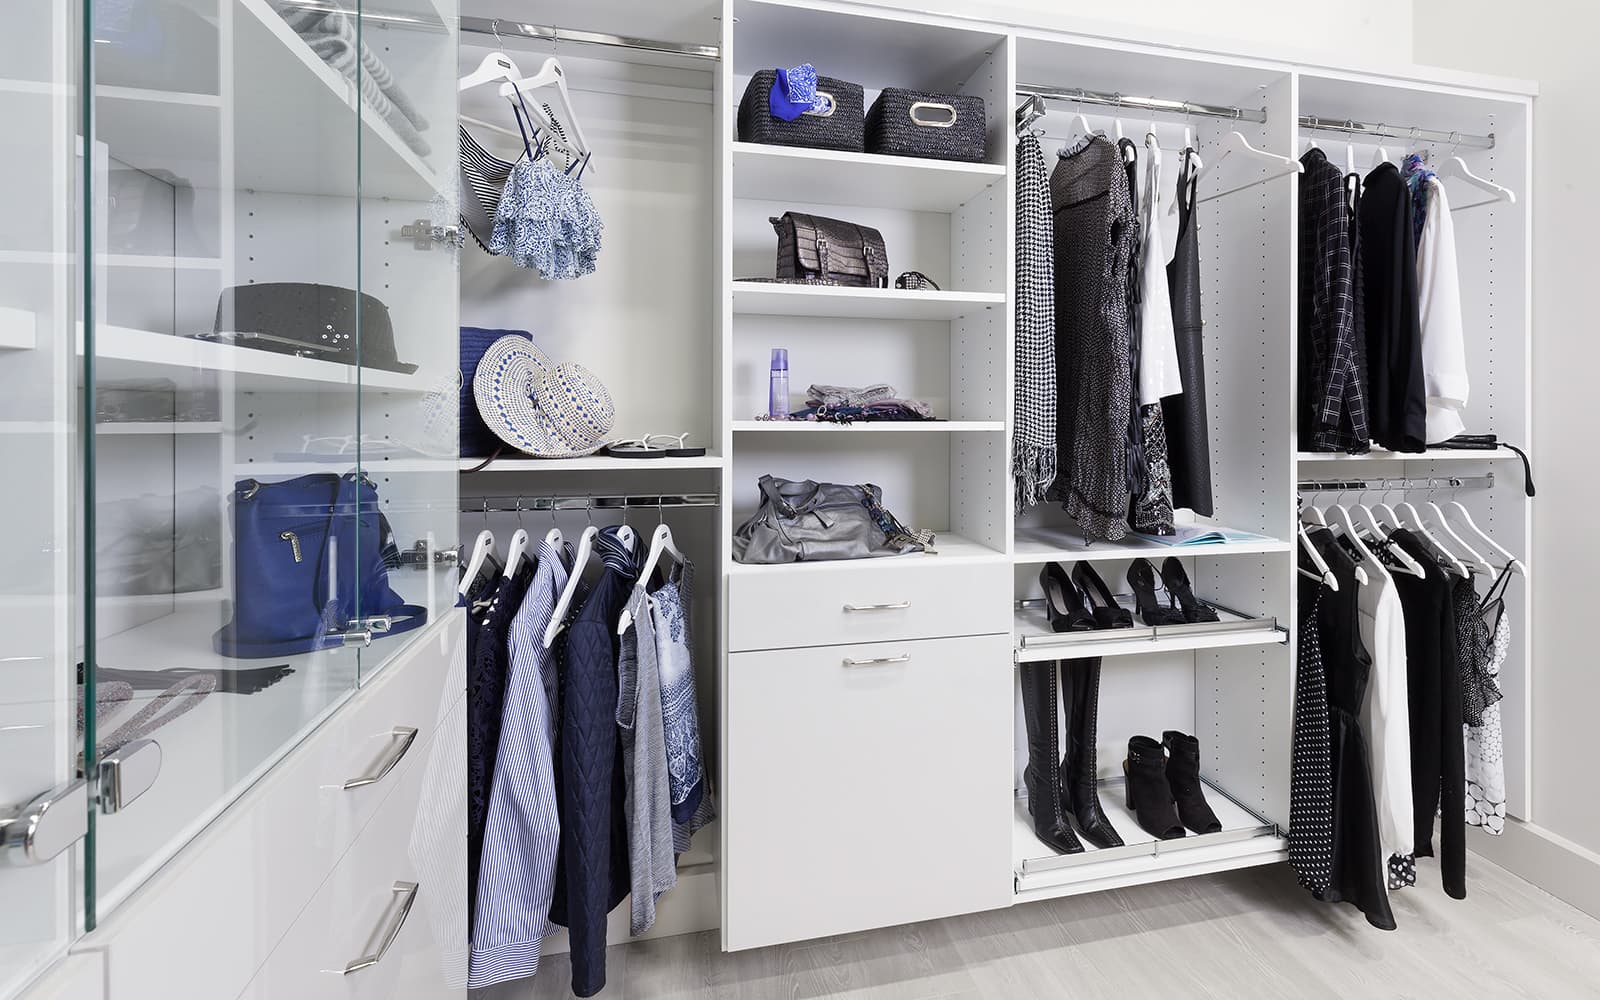 A Walk-In Closet Is a Waste of Space